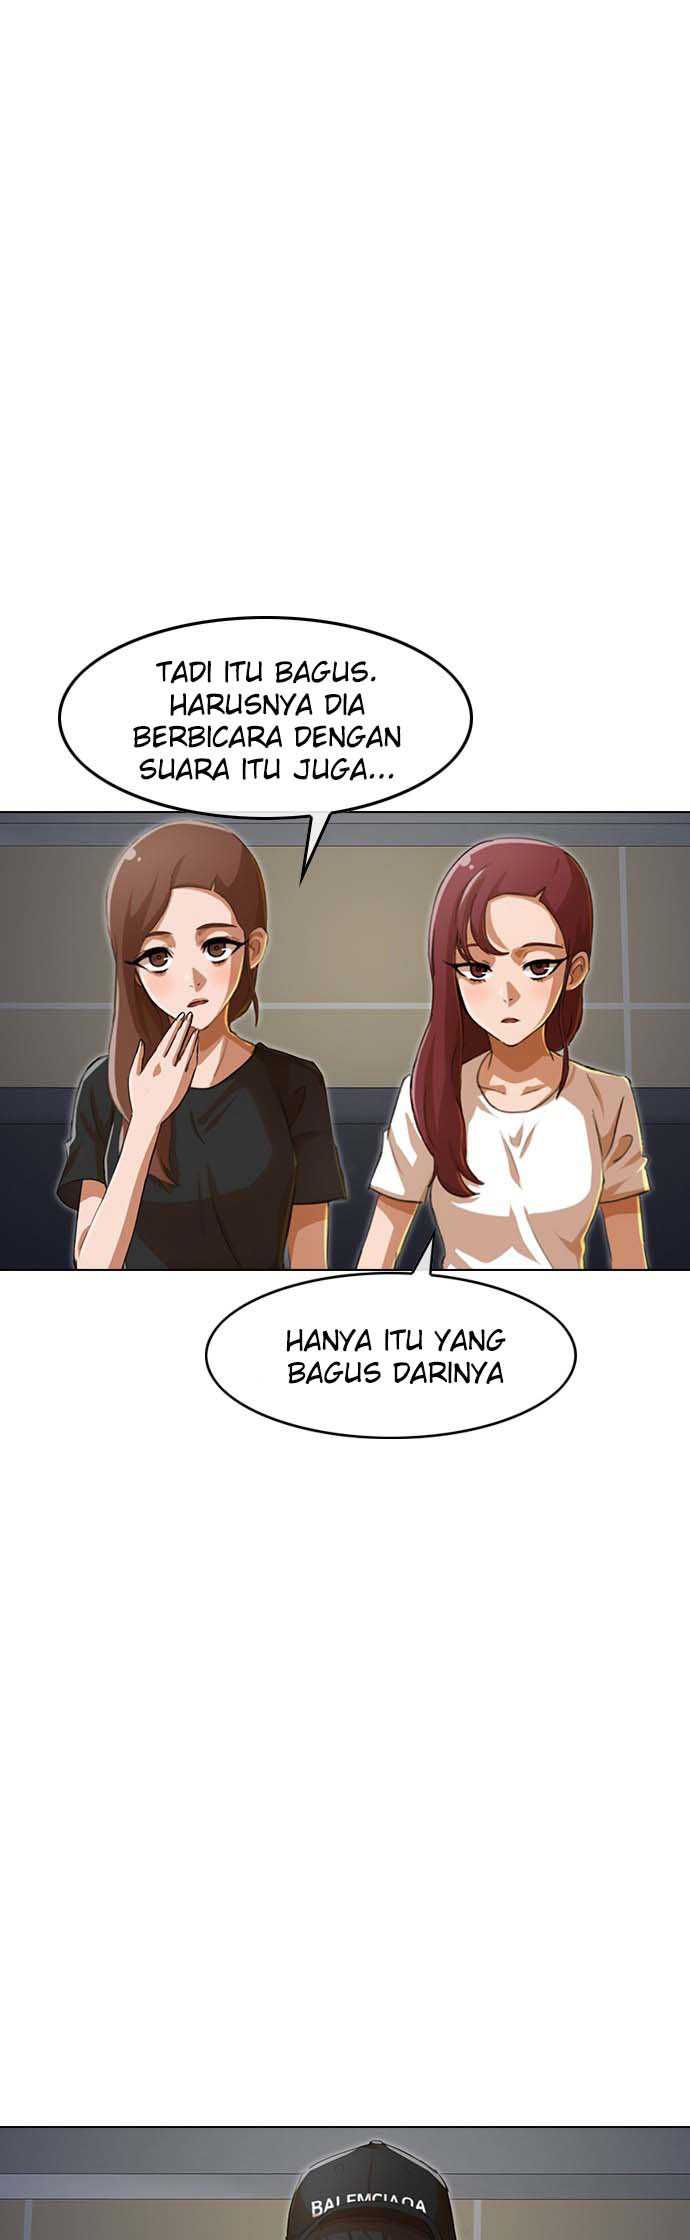 The Girl from Random Chatting! Chapter 76